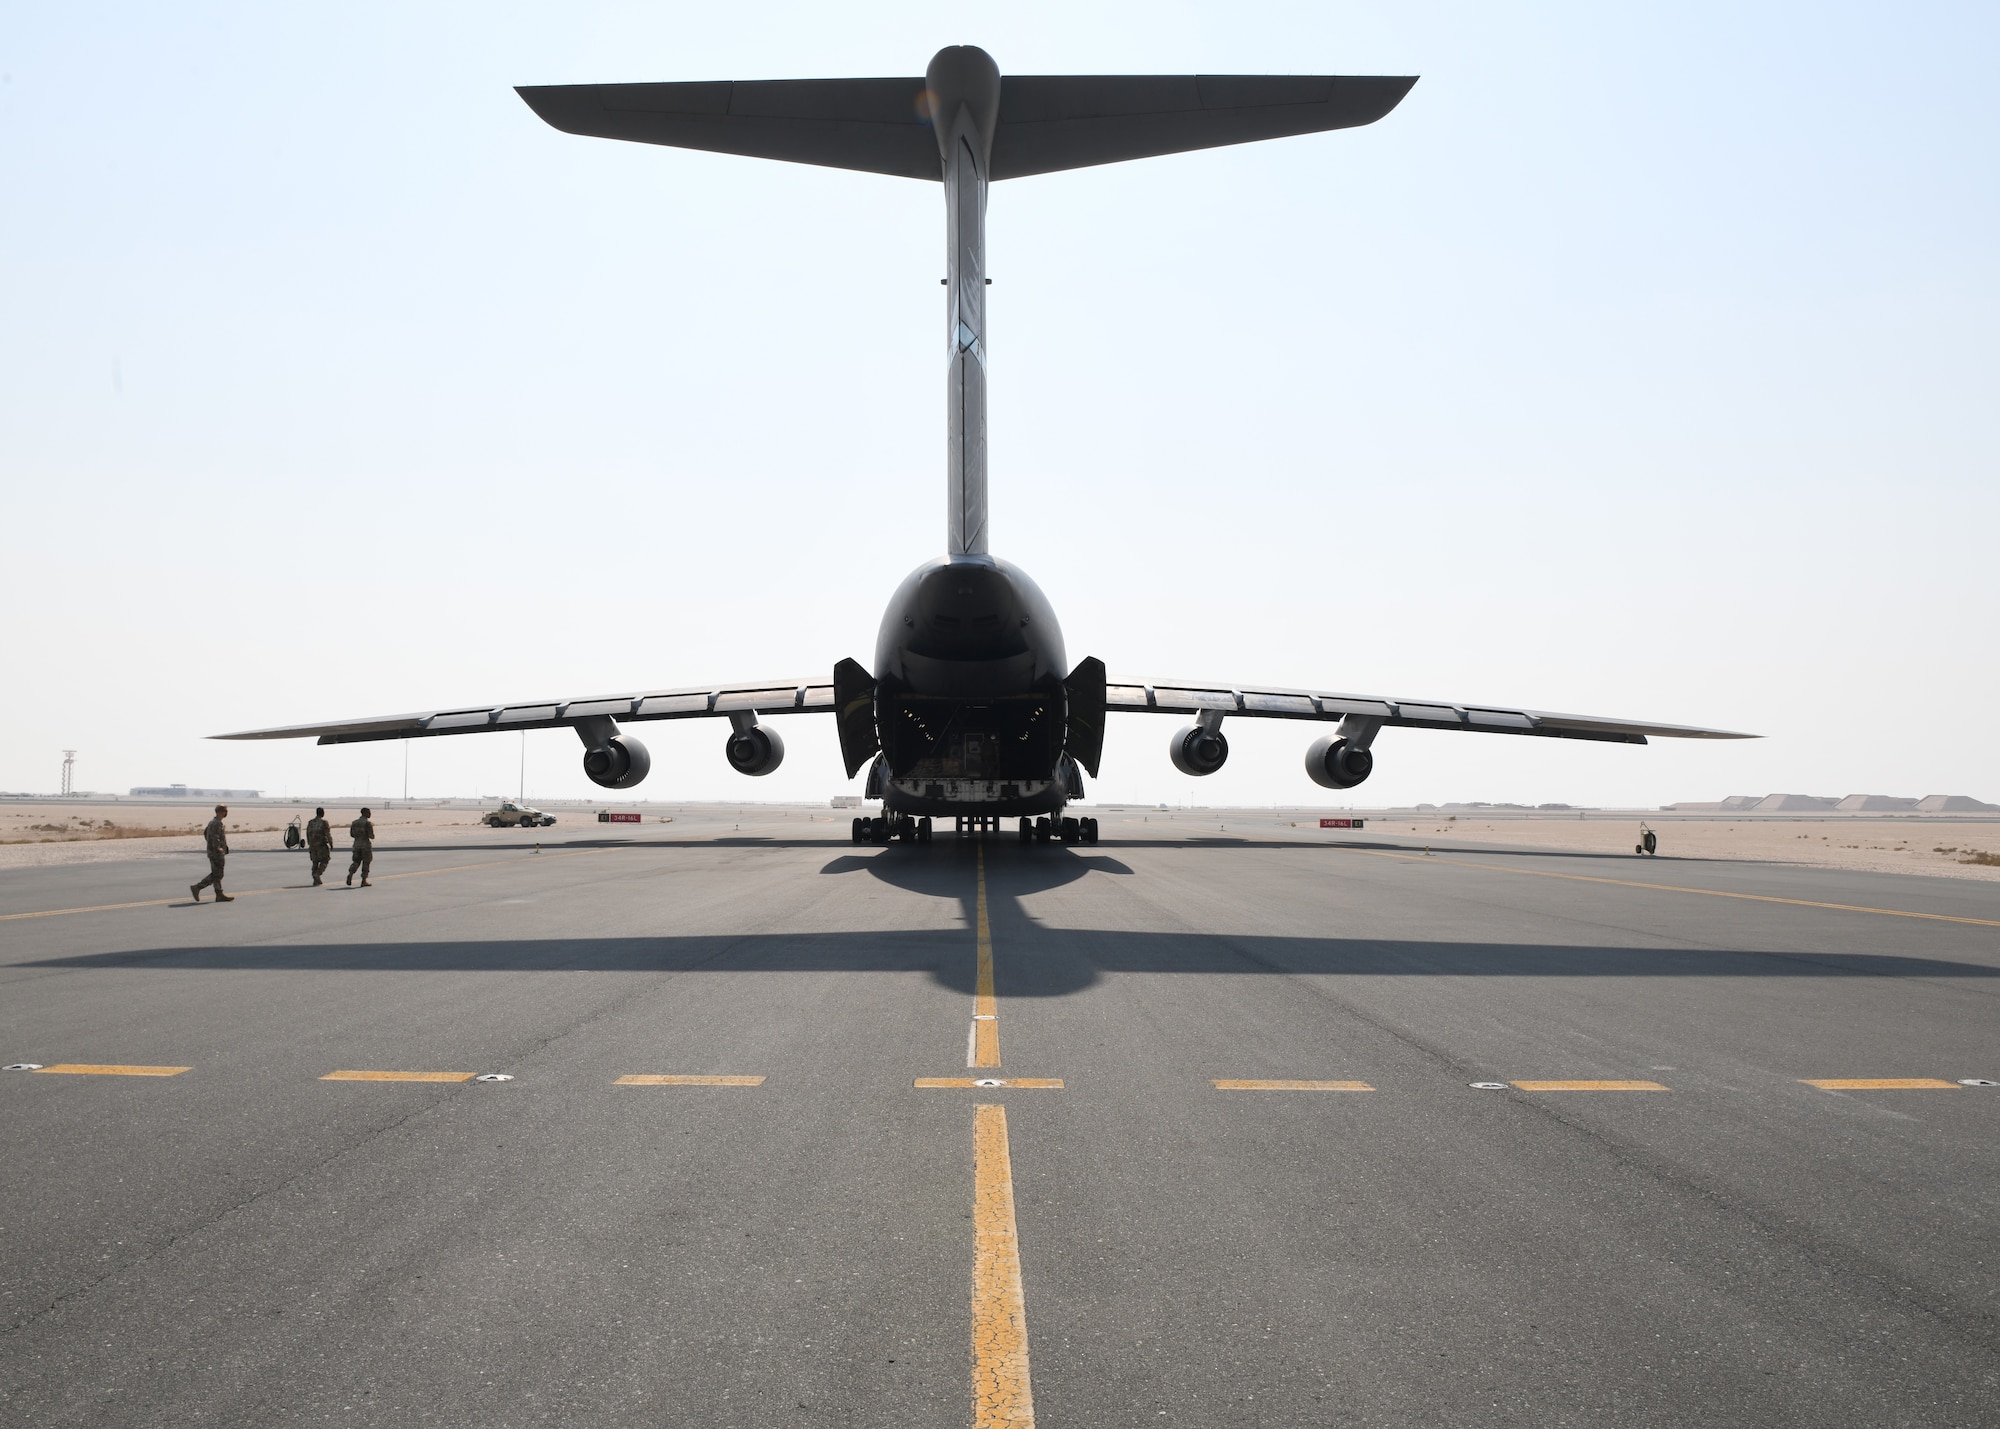 A C-5 Galaxy sits on the flight line of Al Udeid Air Base, Qatar, Sept. 18, 2020, to deliver a specialized medical container designed to transport individuals with infectious diseases. The Negatively Pressurized Conex, or NPC, is configured for the C-17 Globemaster III and C-5 Super Galaxy aircraft to safely transport up to 28 passengers or 23 patients, including ambulatory and litter, around the globe. (U.S. Air Force photo by Staff Sgt. Kayla White)